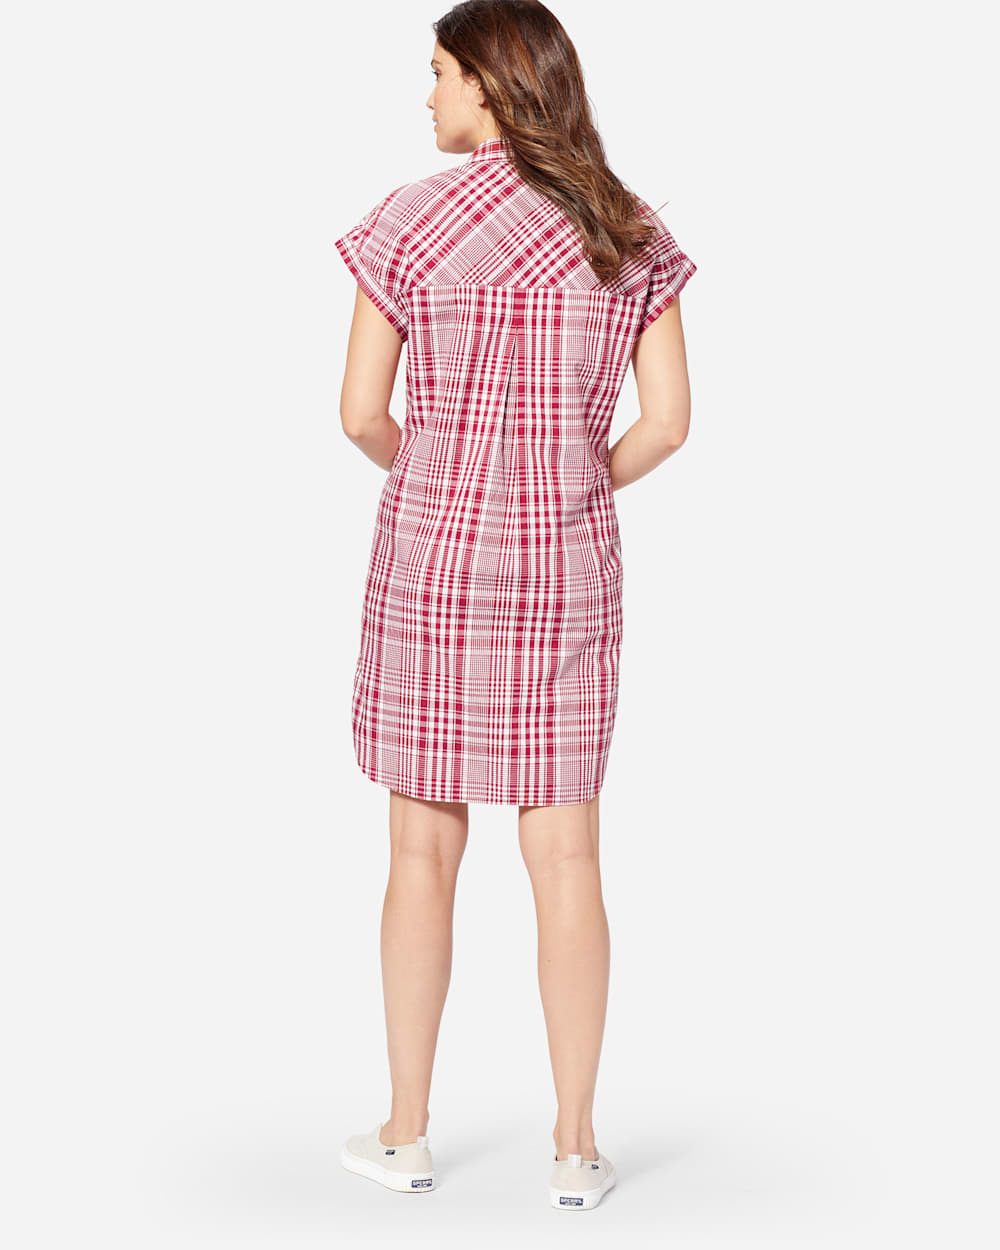 ADDITIONAL VIEW OF SUNNYSIDE TWO POCKET SHIRT DRESS IN RED ROCK image number 3